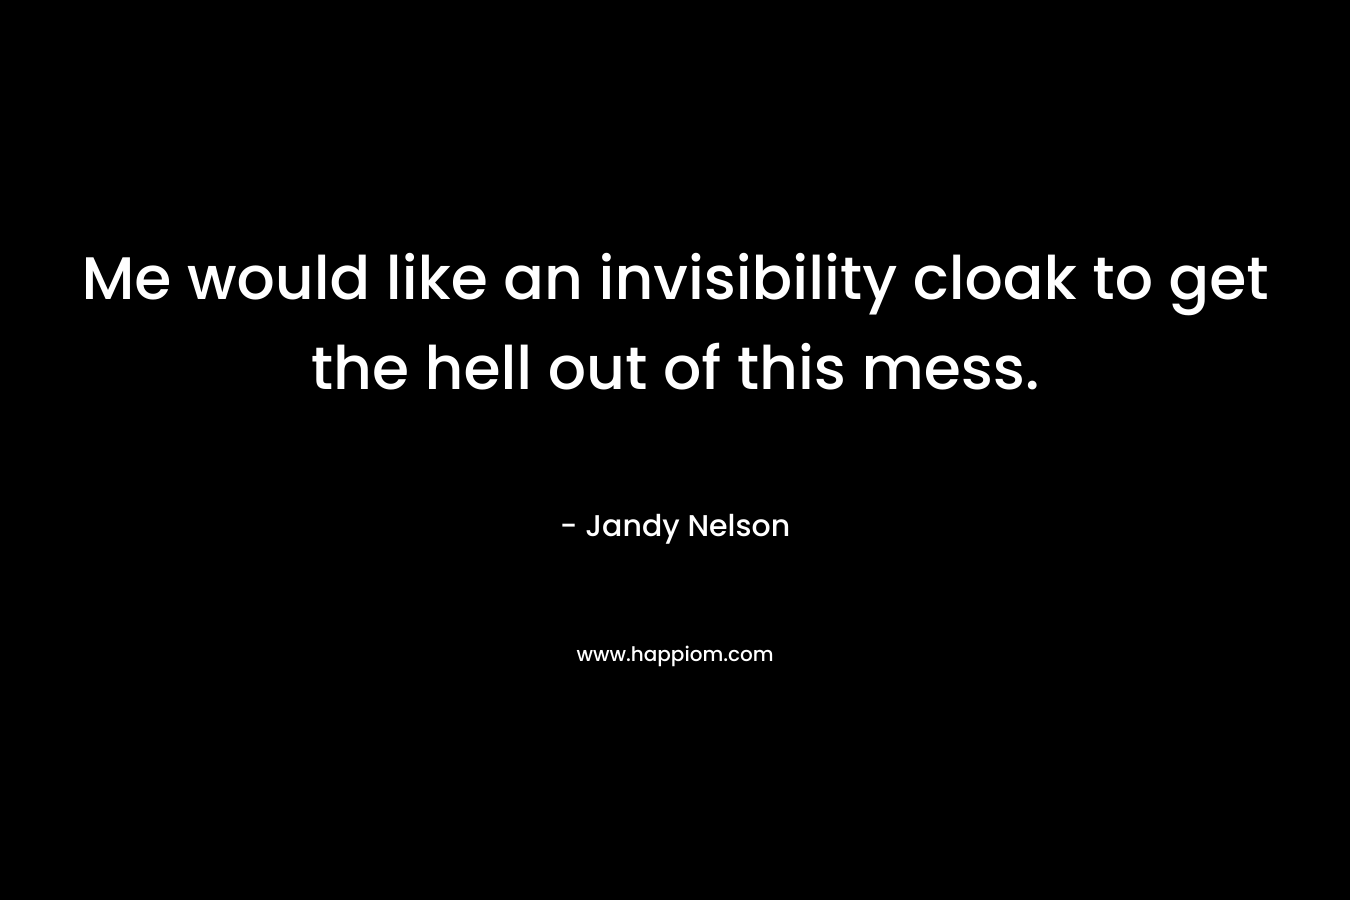 Me would like an invisibility cloak to get the hell out of this mess. – Jandy Nelson